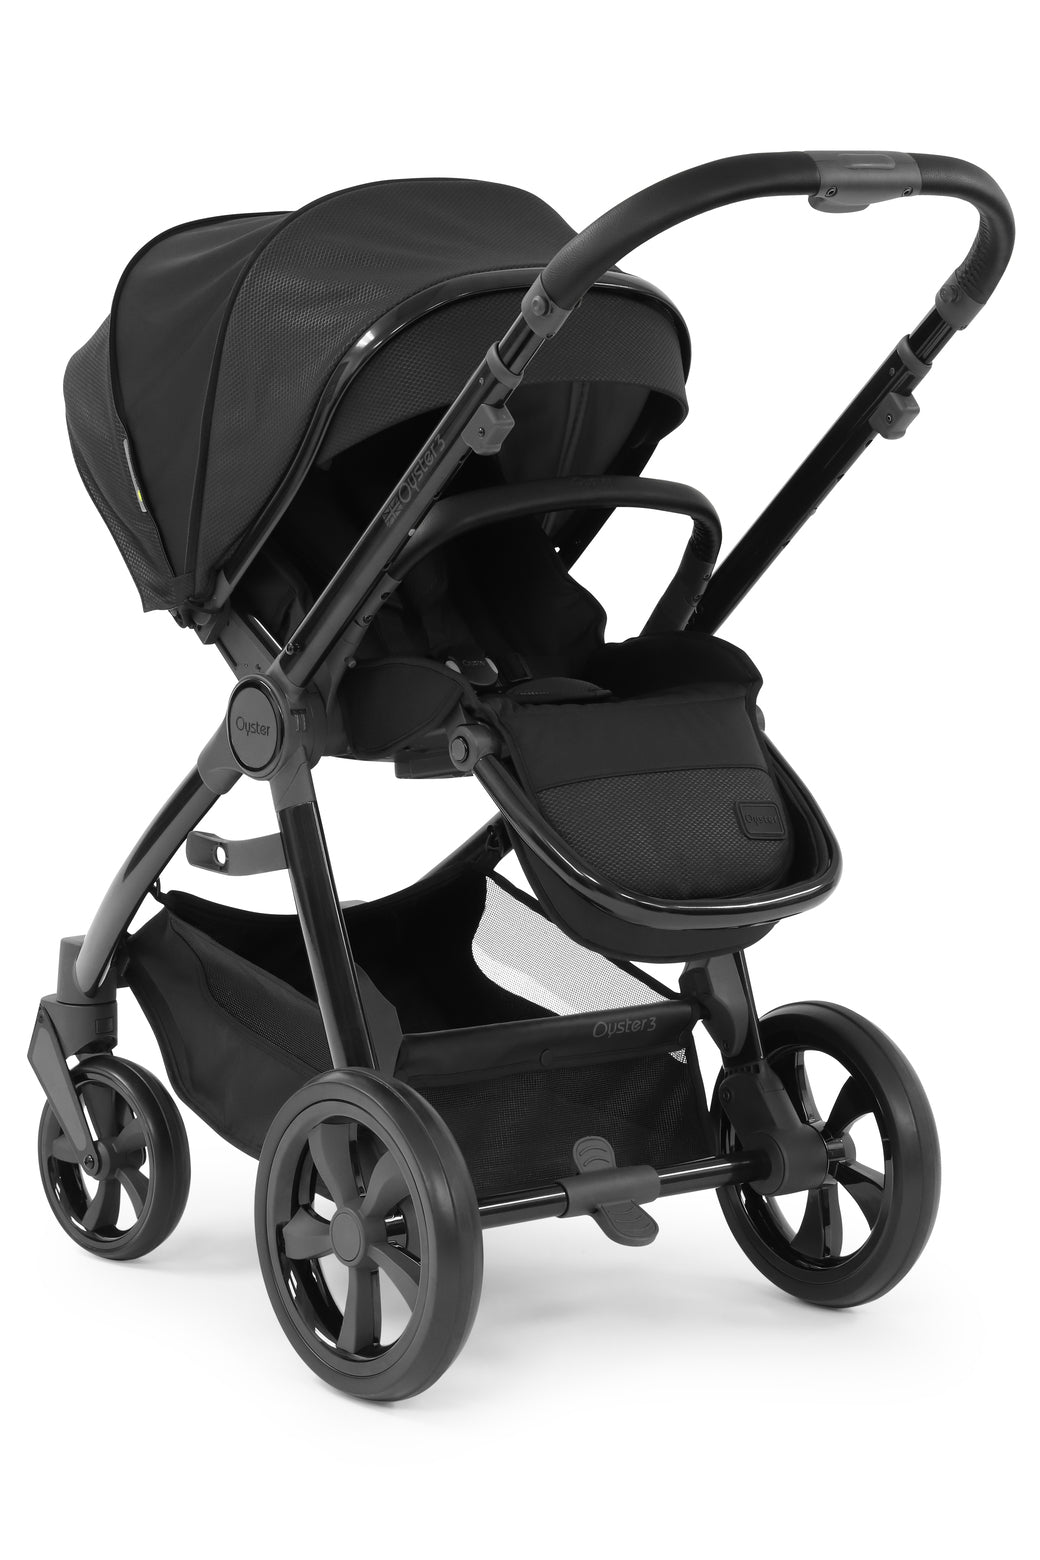 Babystyle Oyster 3 Luxury 7 Piece Travel System Bundle With Carbiofix - Pixel - For Your Little One